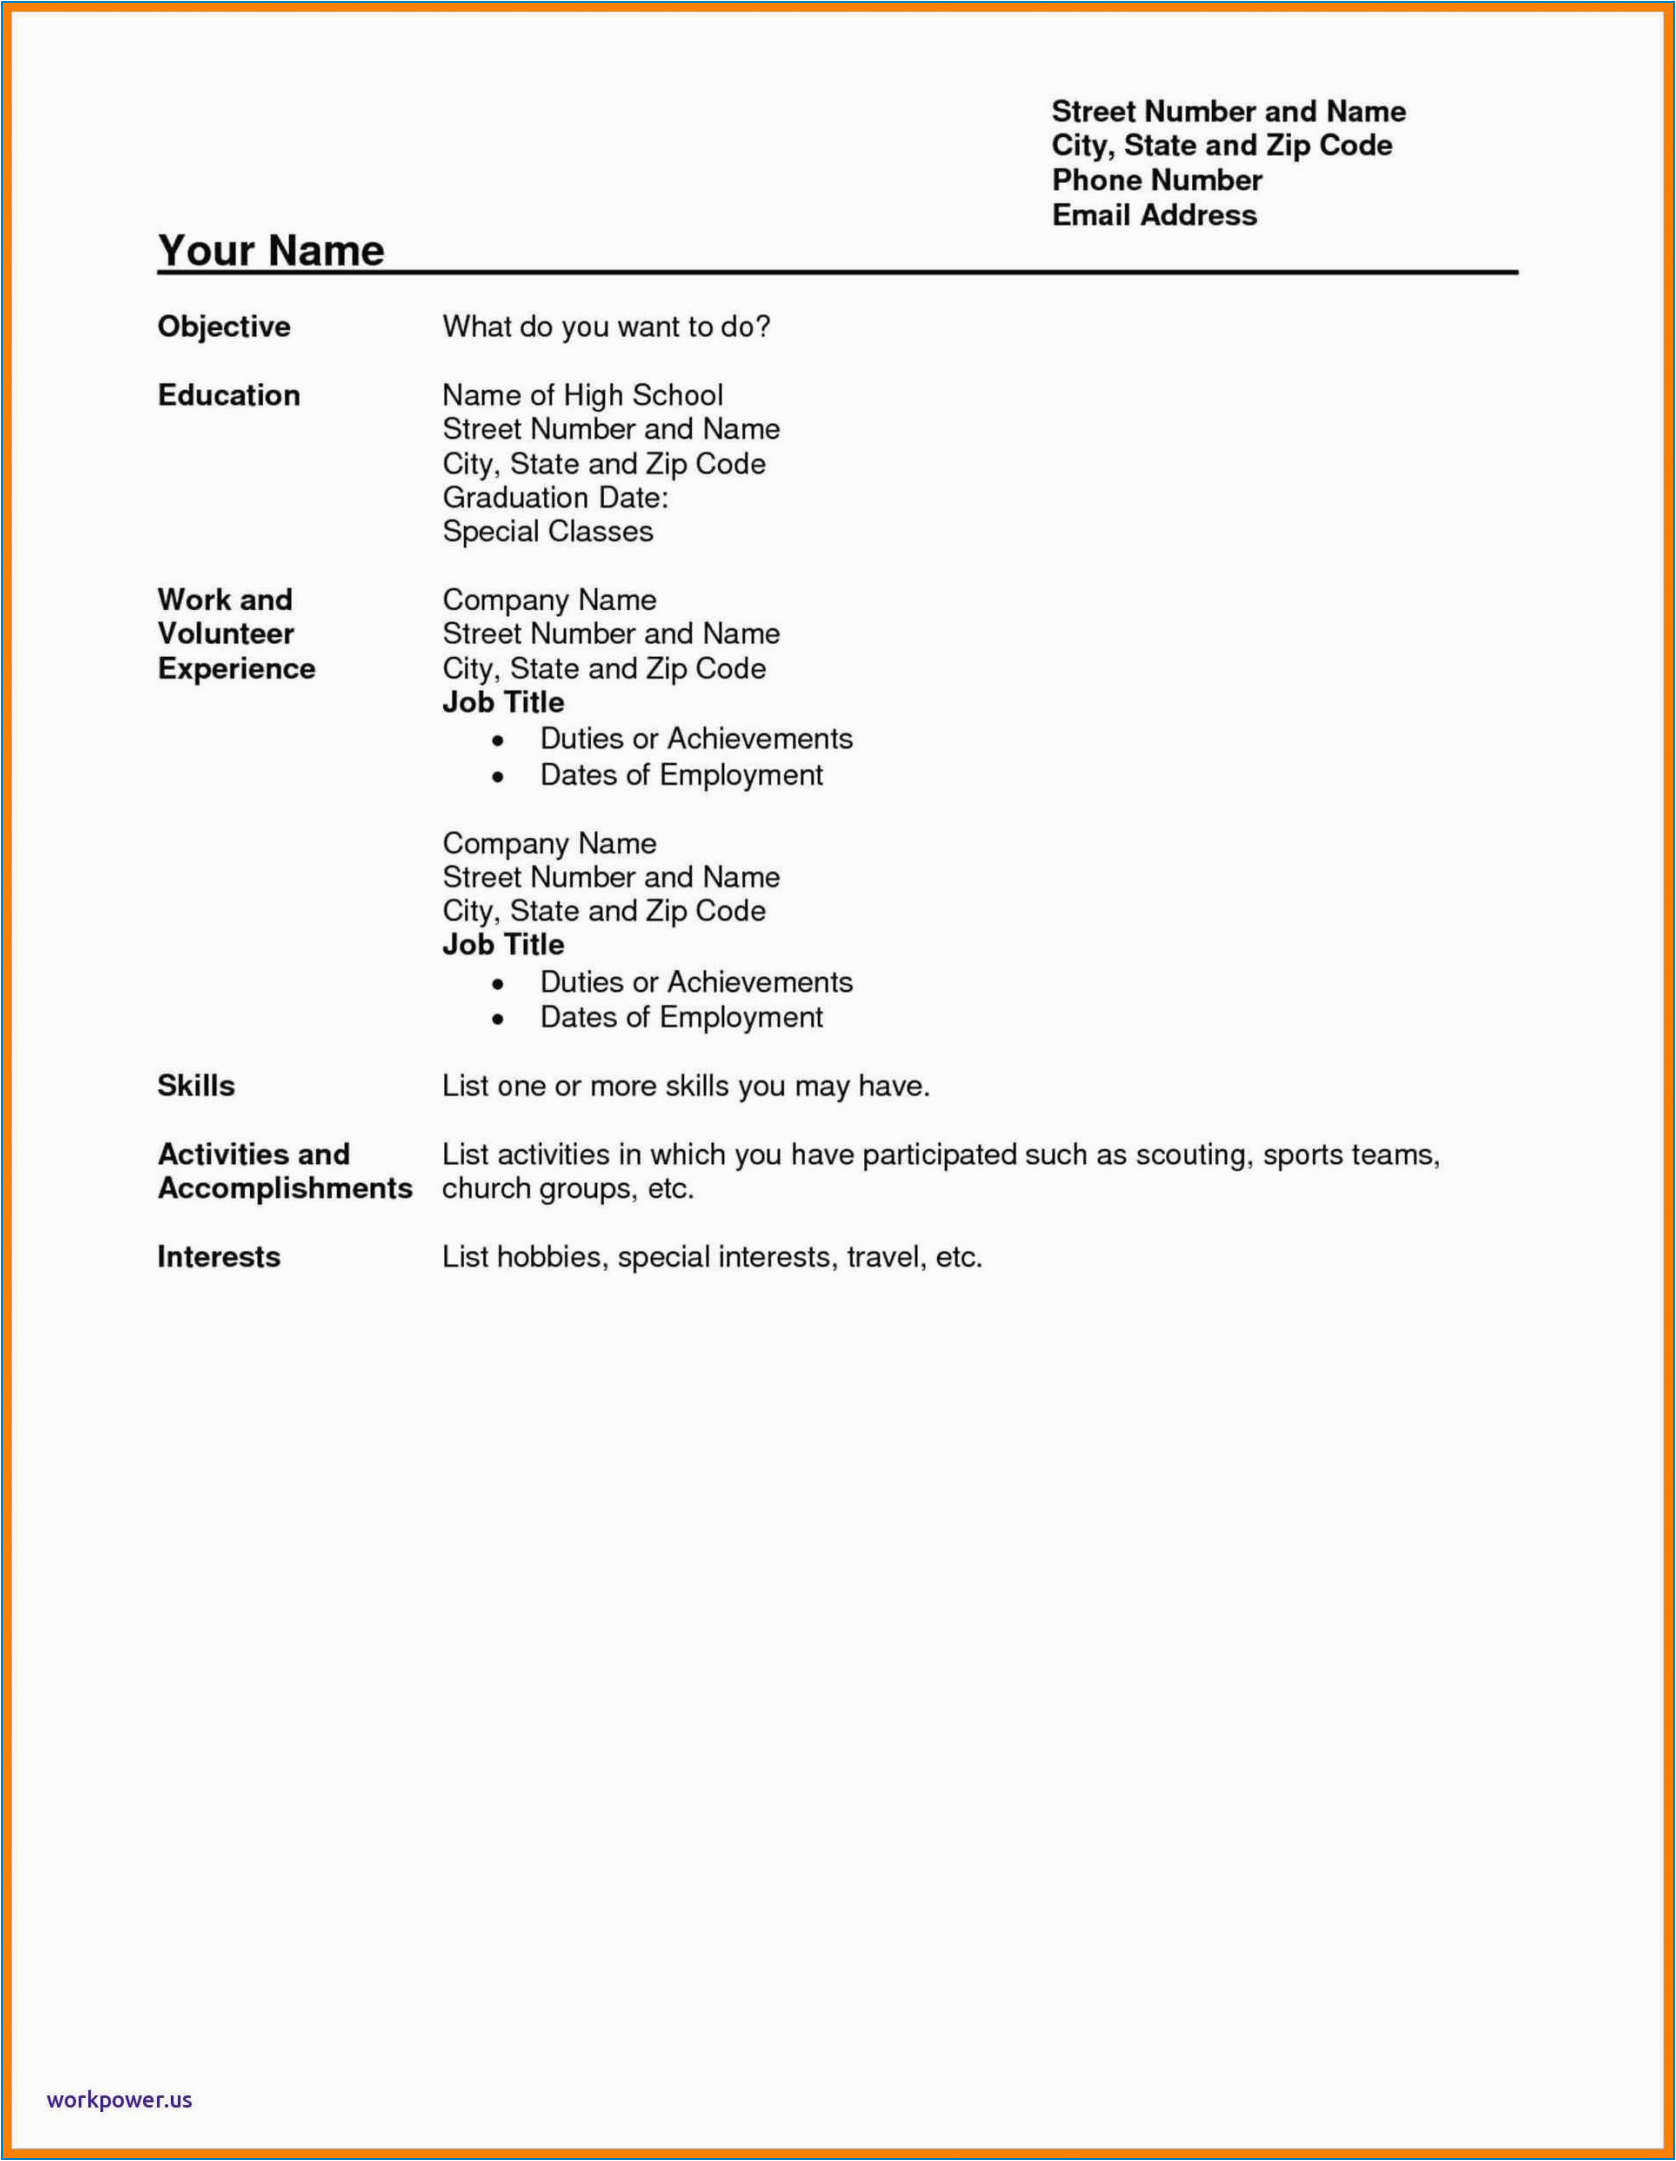 Simple Resume Template for High School Students Basic Resume Templates for High School Students